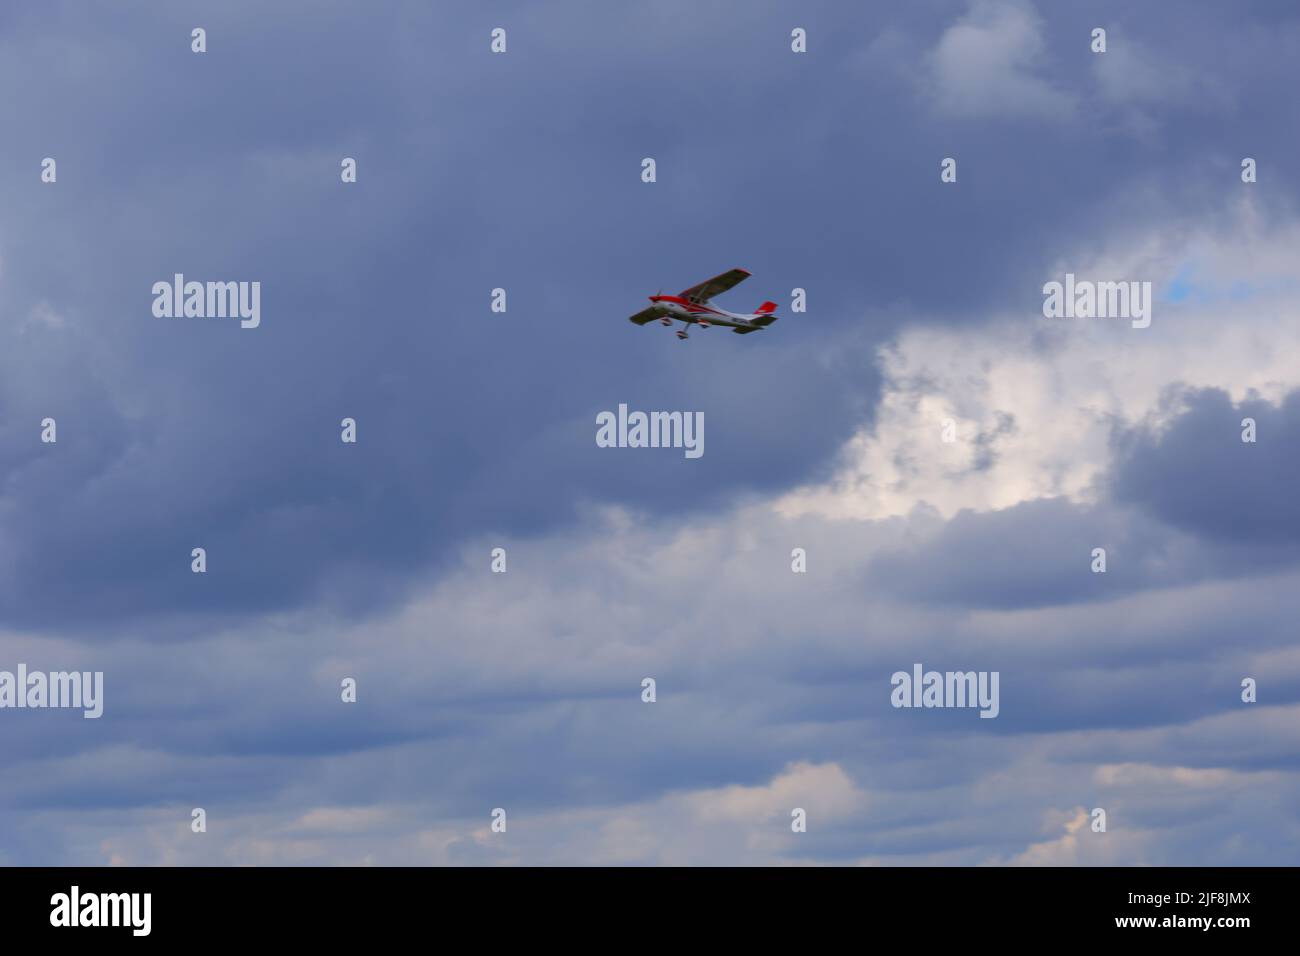 Small airplane flying within dark clouds Stock Photo